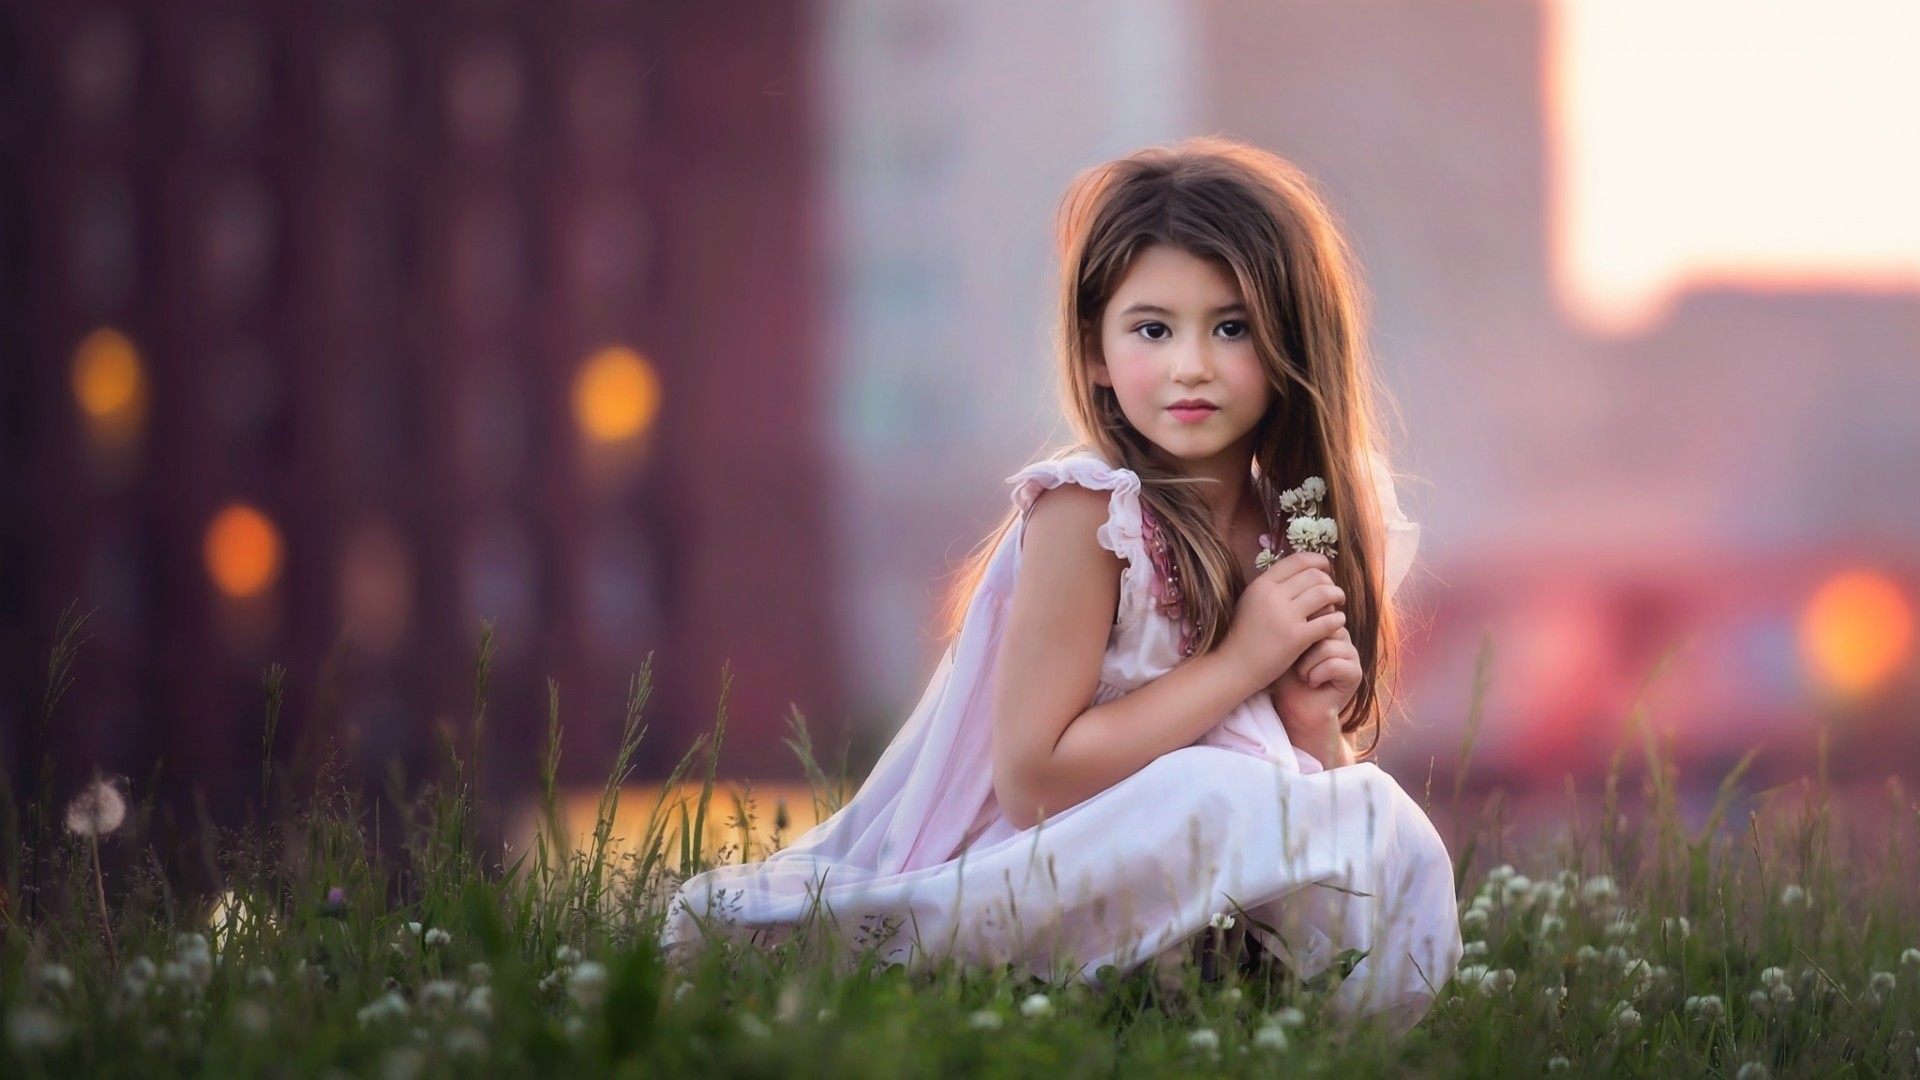 1920x1080 Collection of Cute Little Girl Wallpapers on HDWallpapers